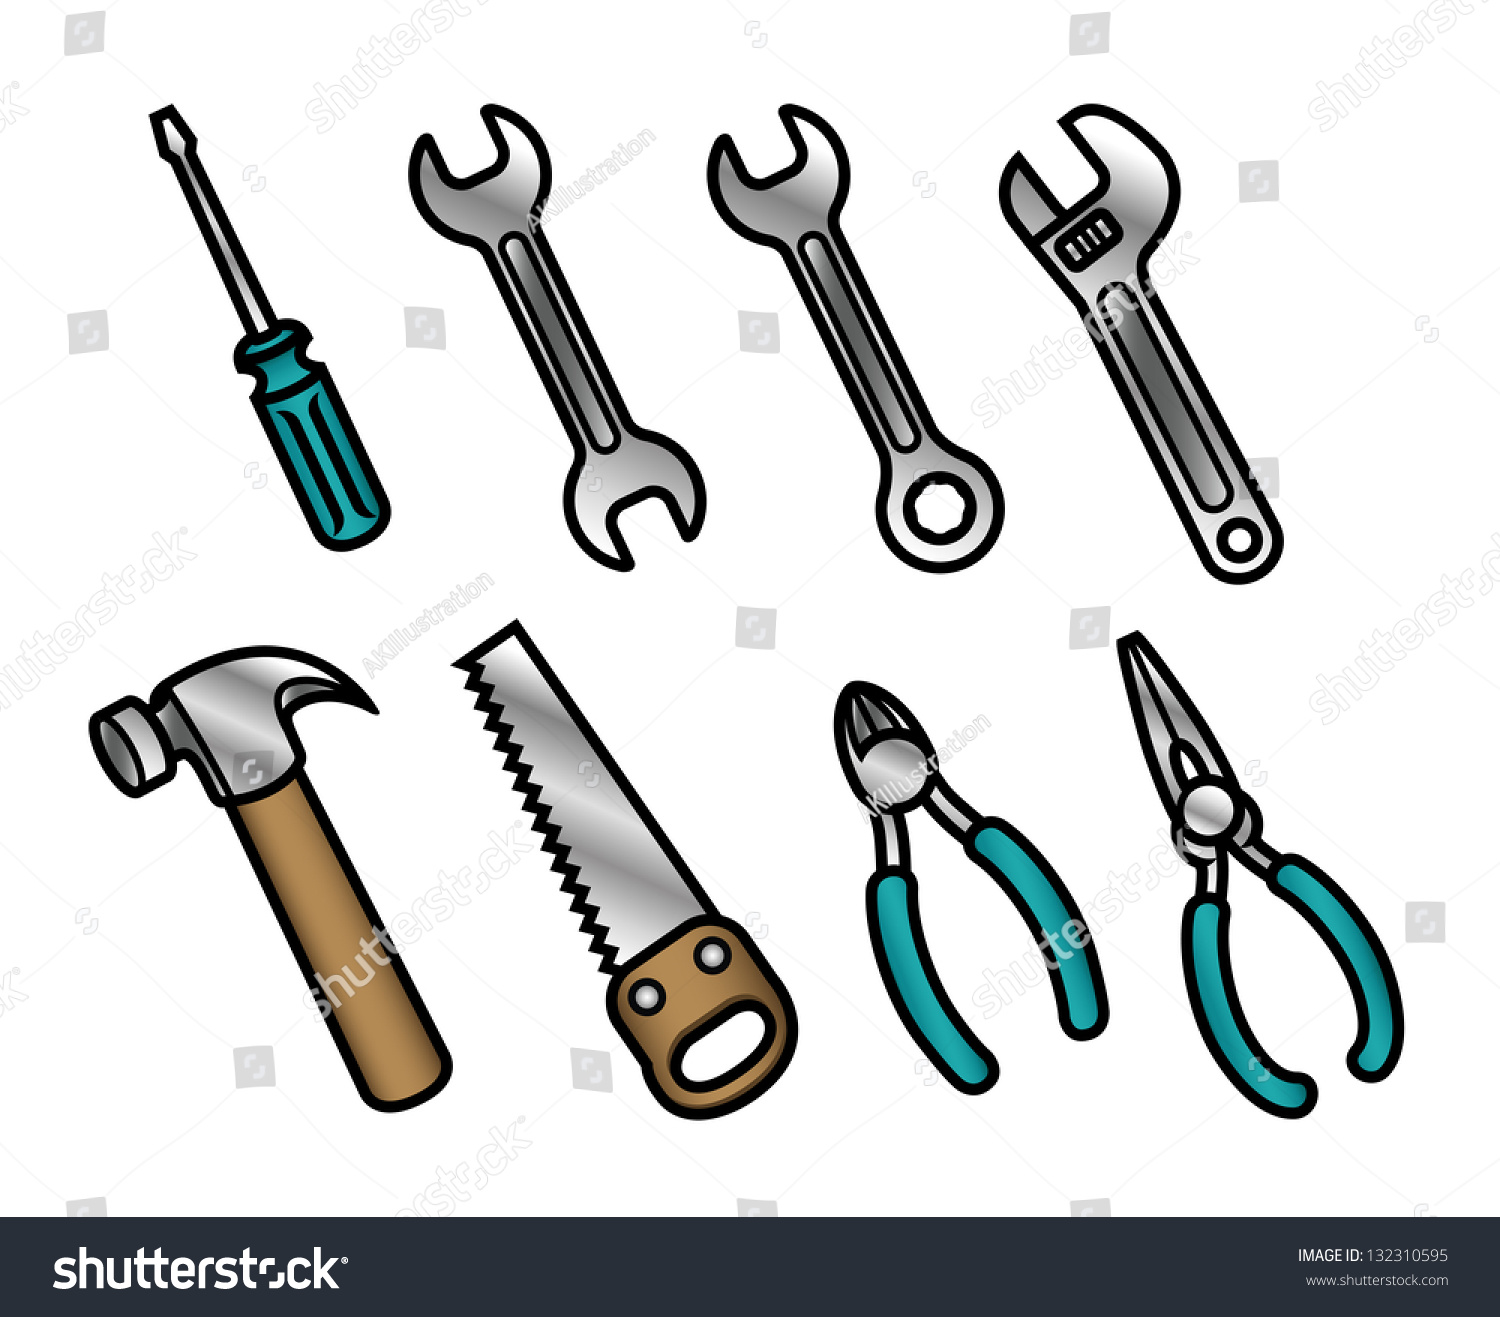 A Set Of 8 Cute And Colorful Cartoon Carpenter Tool Icons. Raster